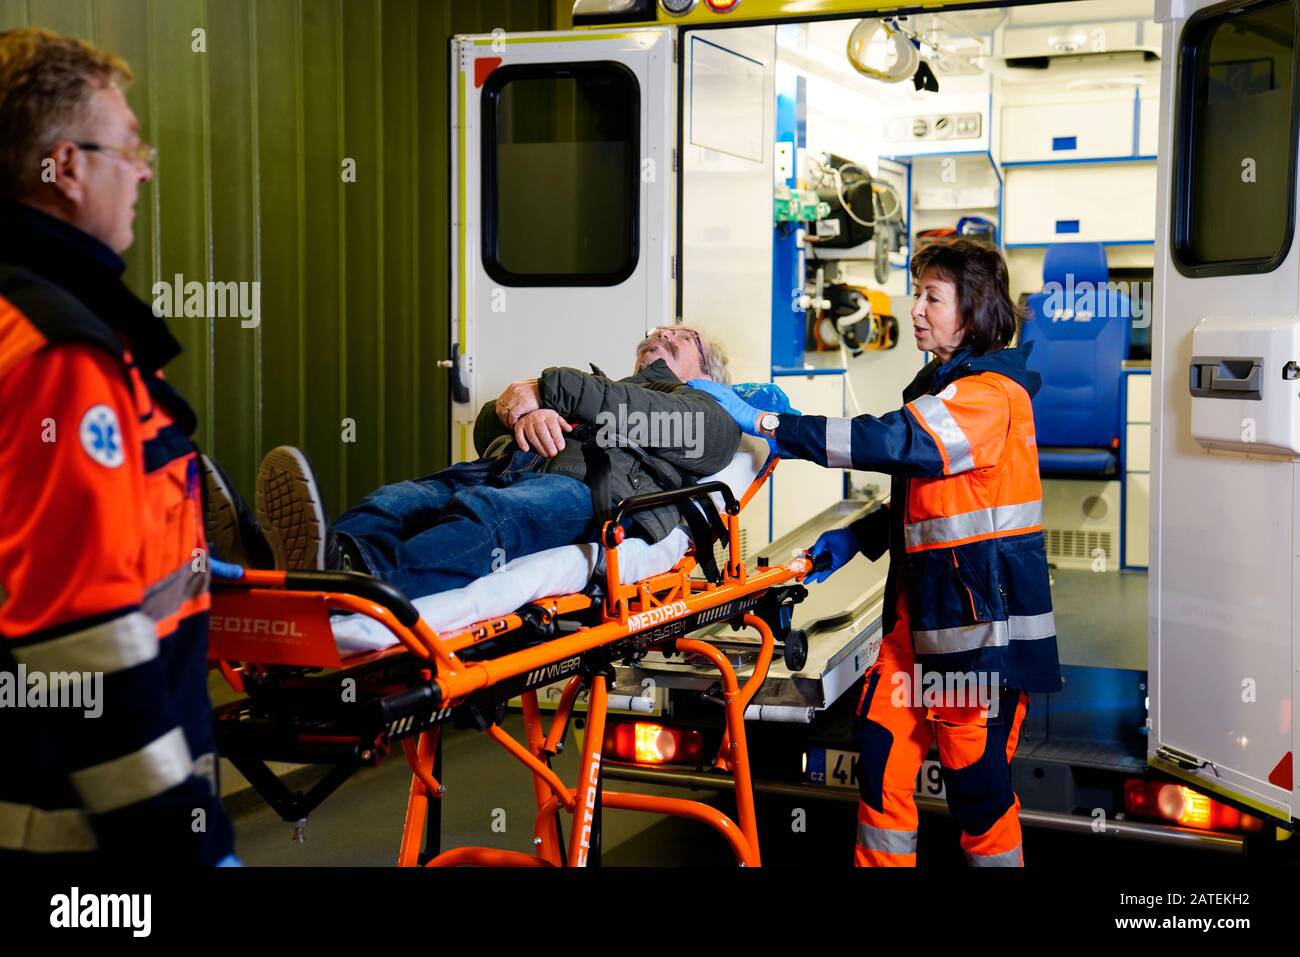 Arrival of the ambulance with the patient in the hospital, Karlovy Vary, Czech Republic Stock Photo